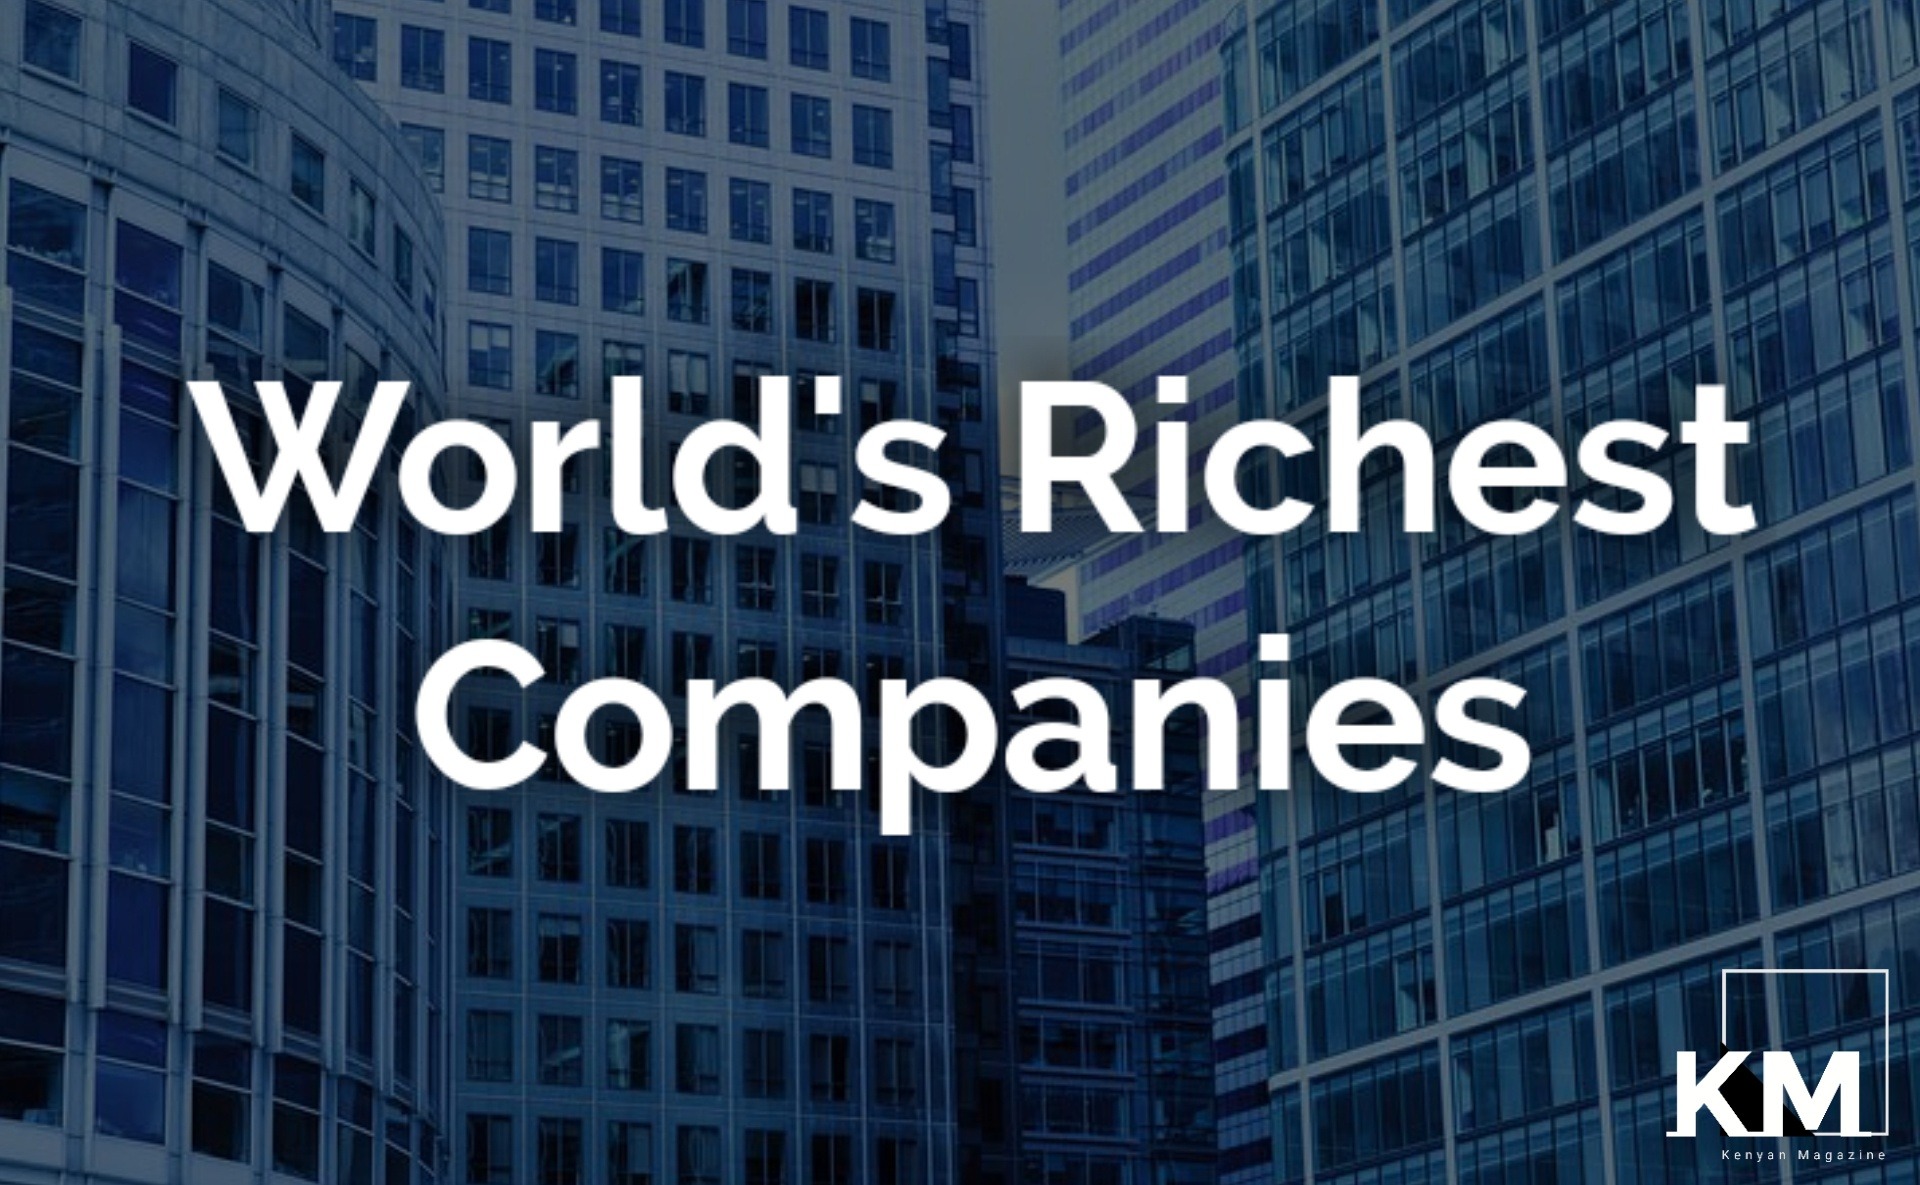 Richest Companies In the world